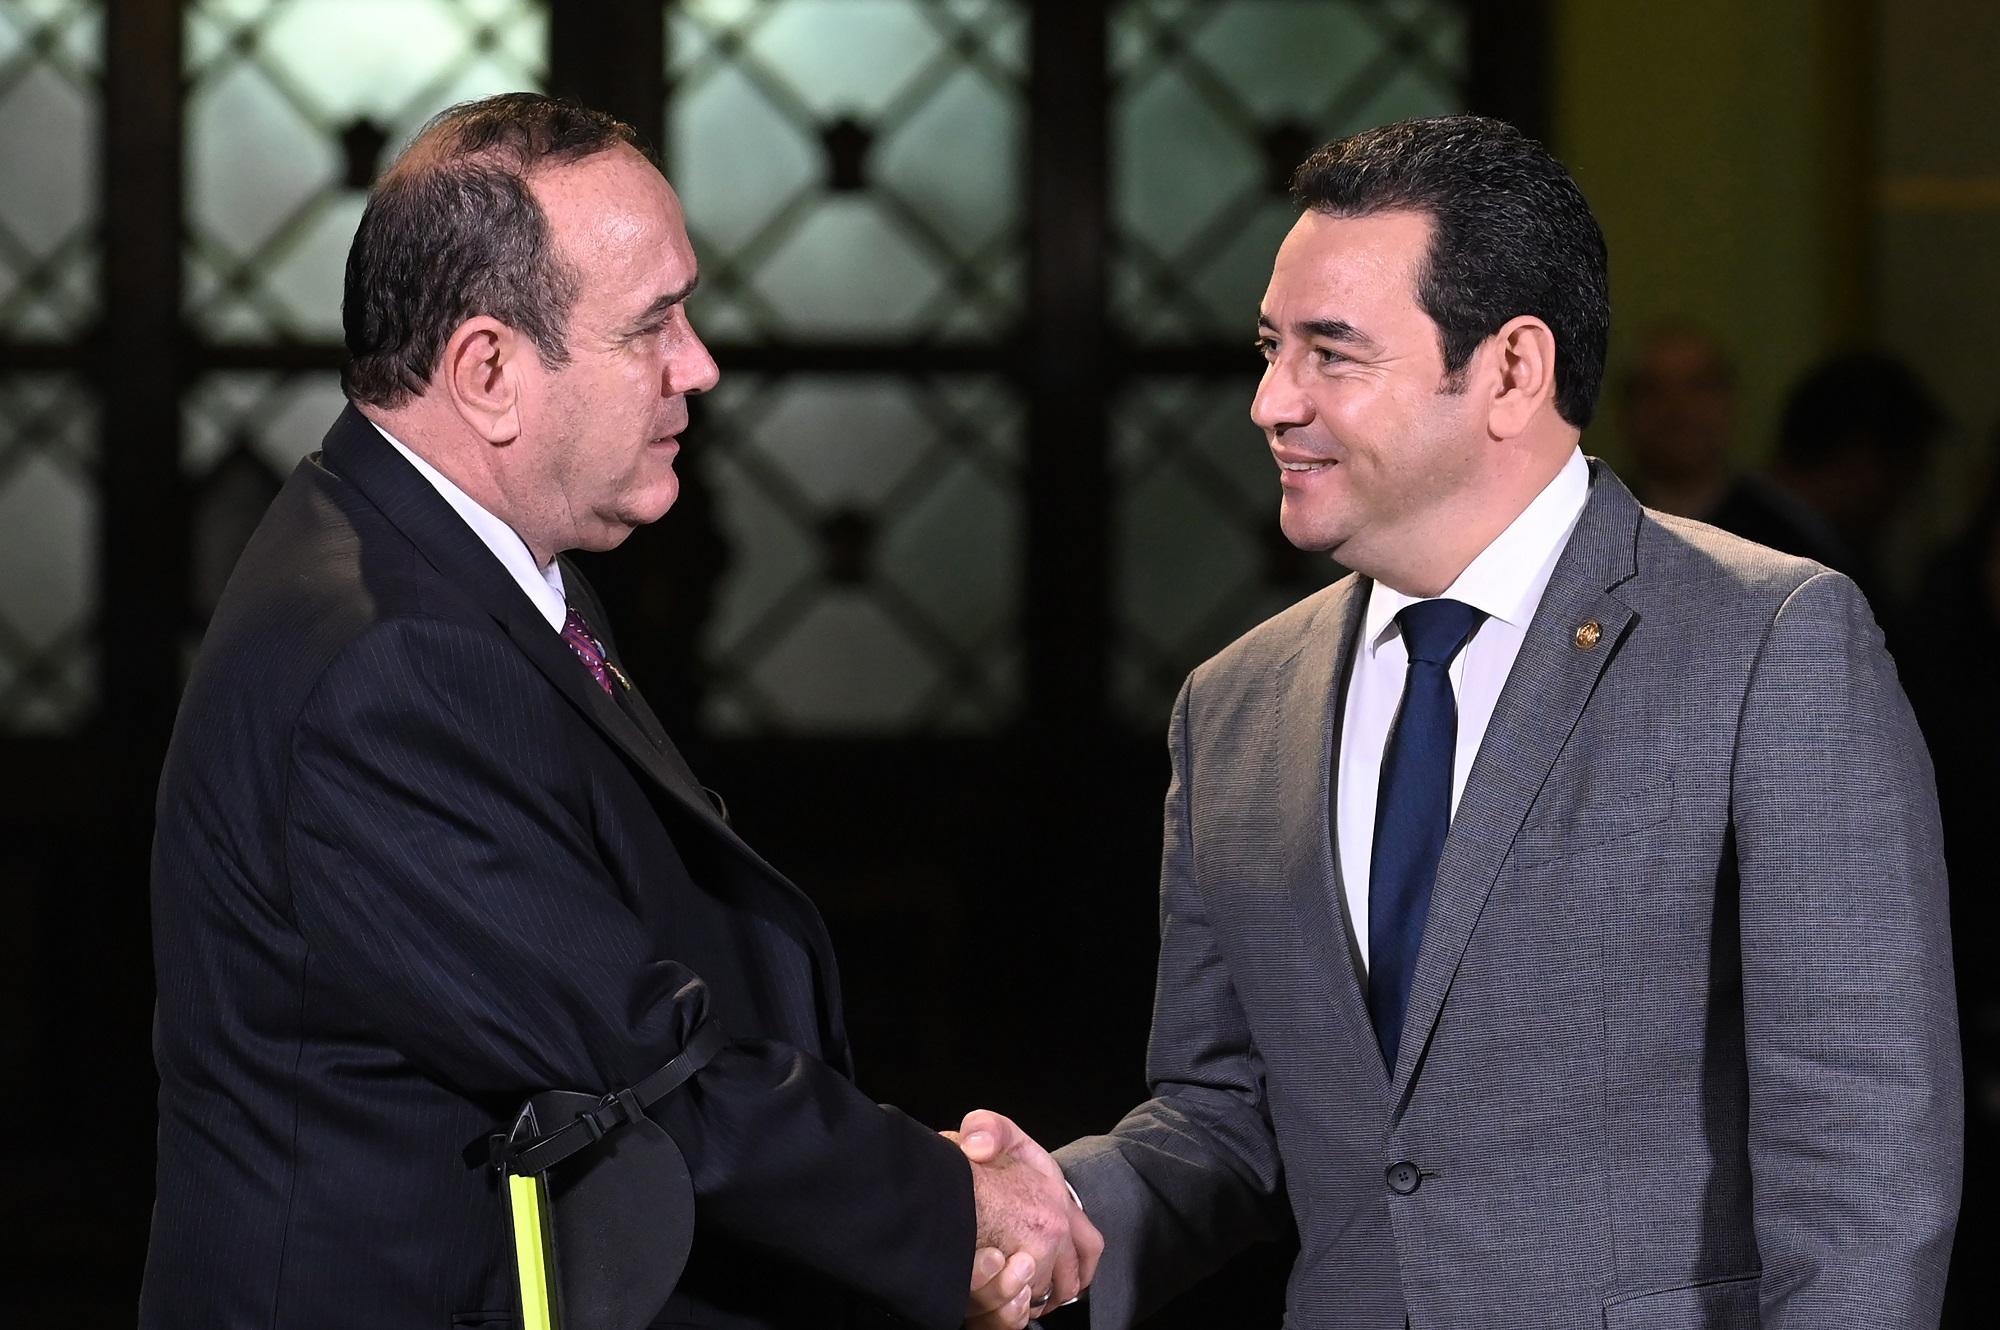 Photo caption: Former Guatemalan president Jimmy Morales (right) greets his successor, Alejandro Giammattei Falla, after a joint conference in the Palace of Culture in Guatemala city on August 14, 2019, three days after the presidential elections. As Giammattei took office on January 14, 2020, he voiced criticism of the Morales administration. Photo by Johan Ordóñez/AFP.